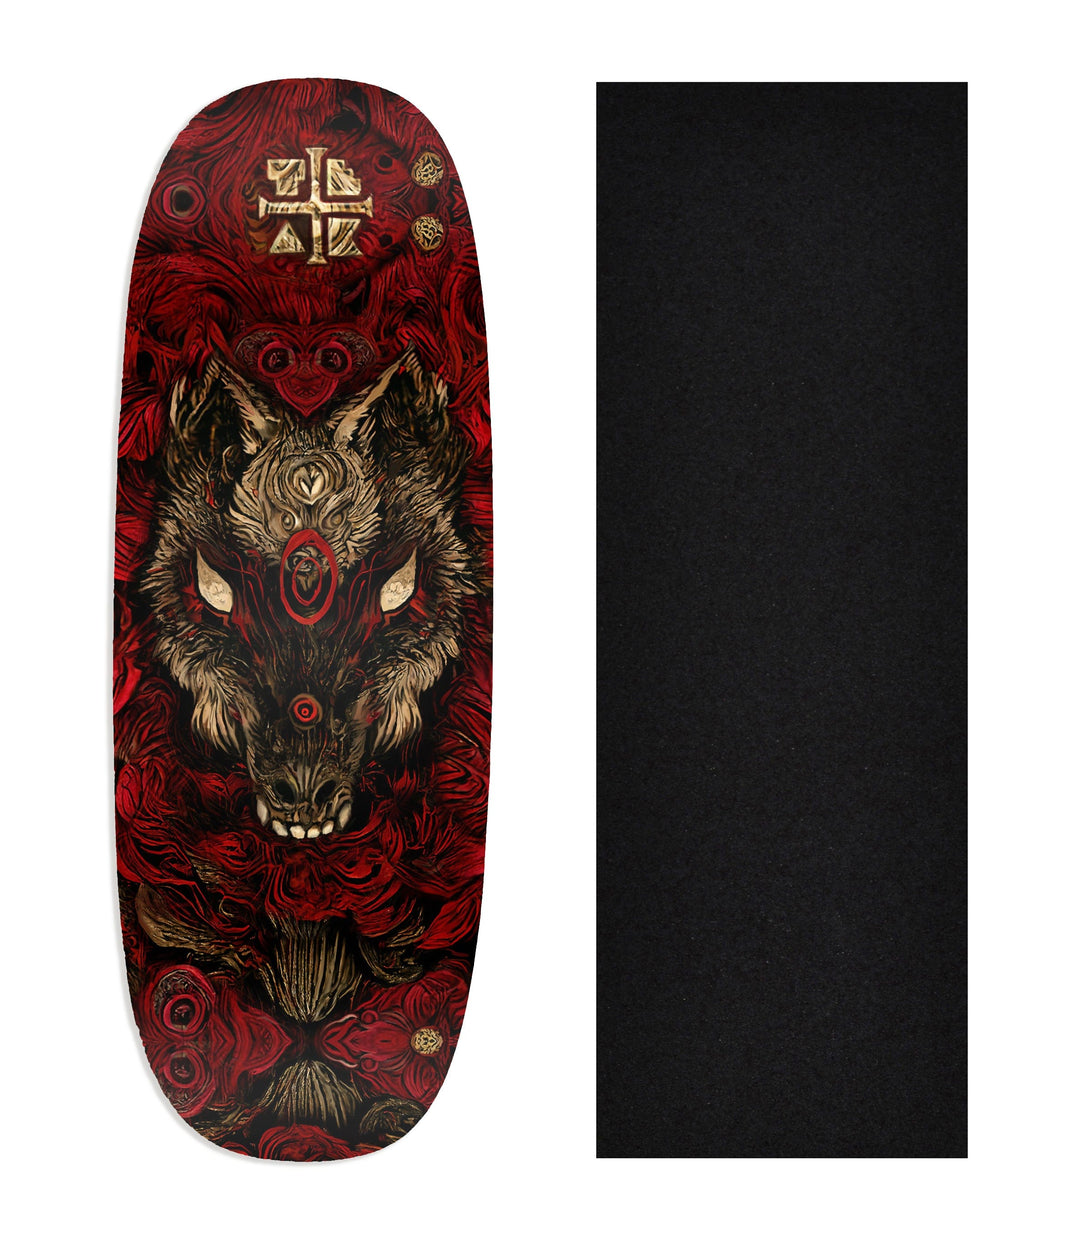 Teak Tuning Heat Transfer Graphic Wooden Fingerboard Deck, "Howl in the Night" Ohhh Deck